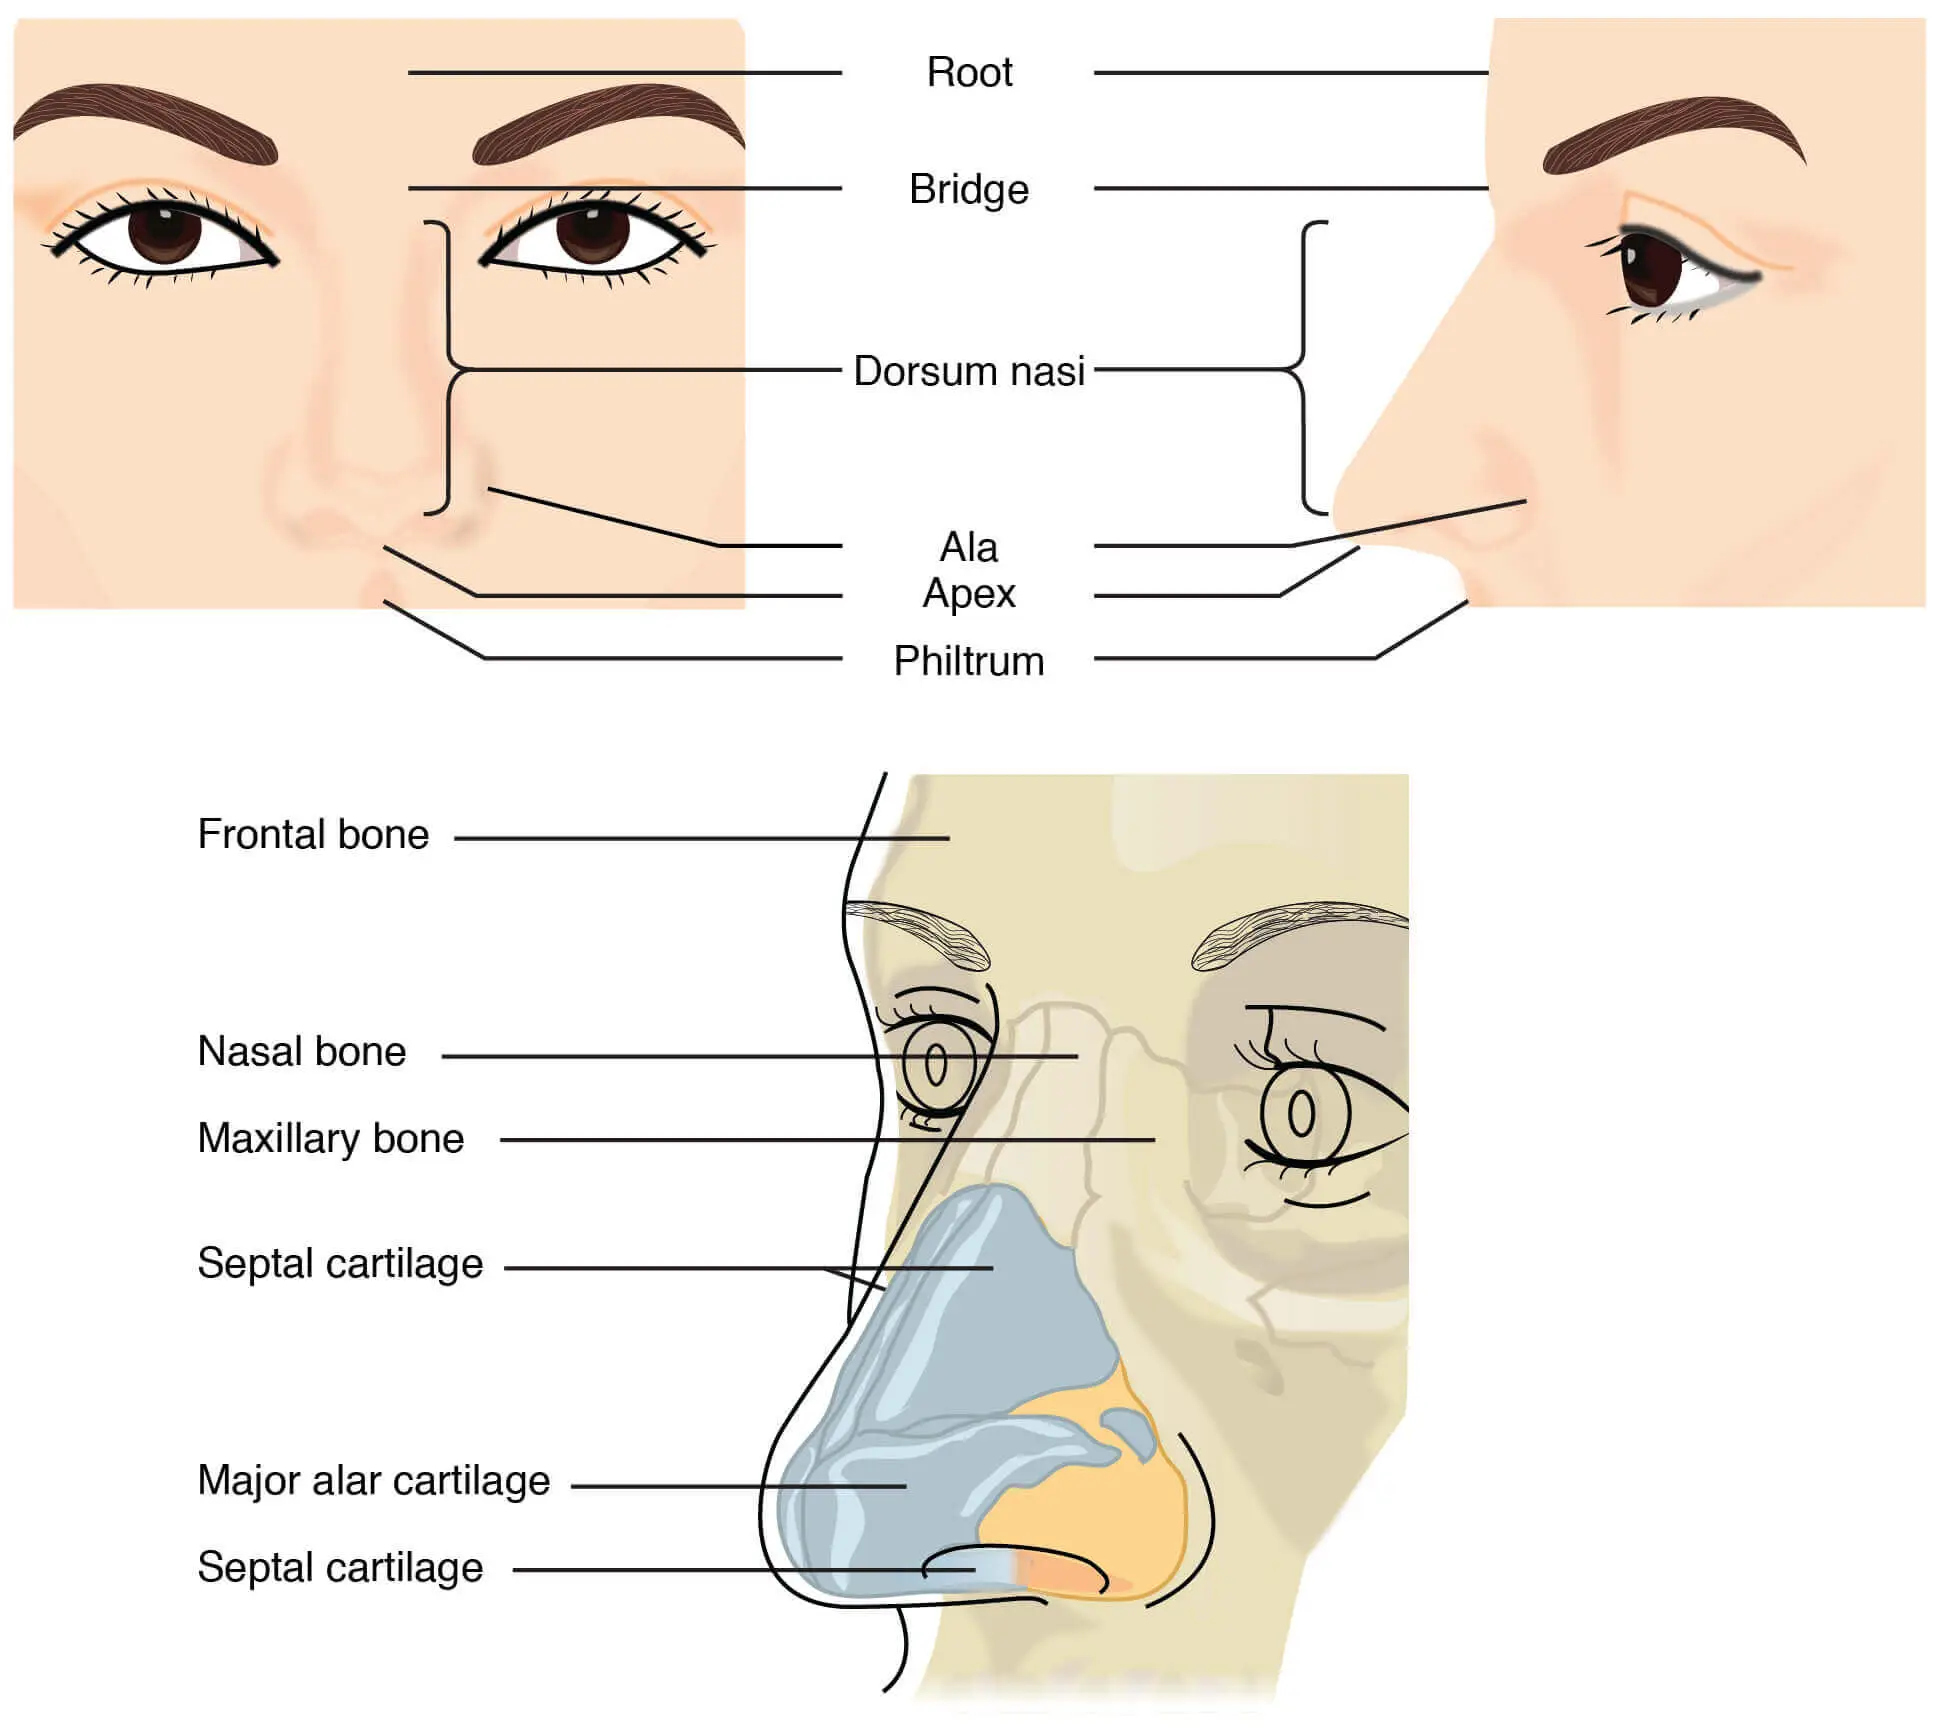 Anatomy of the nose